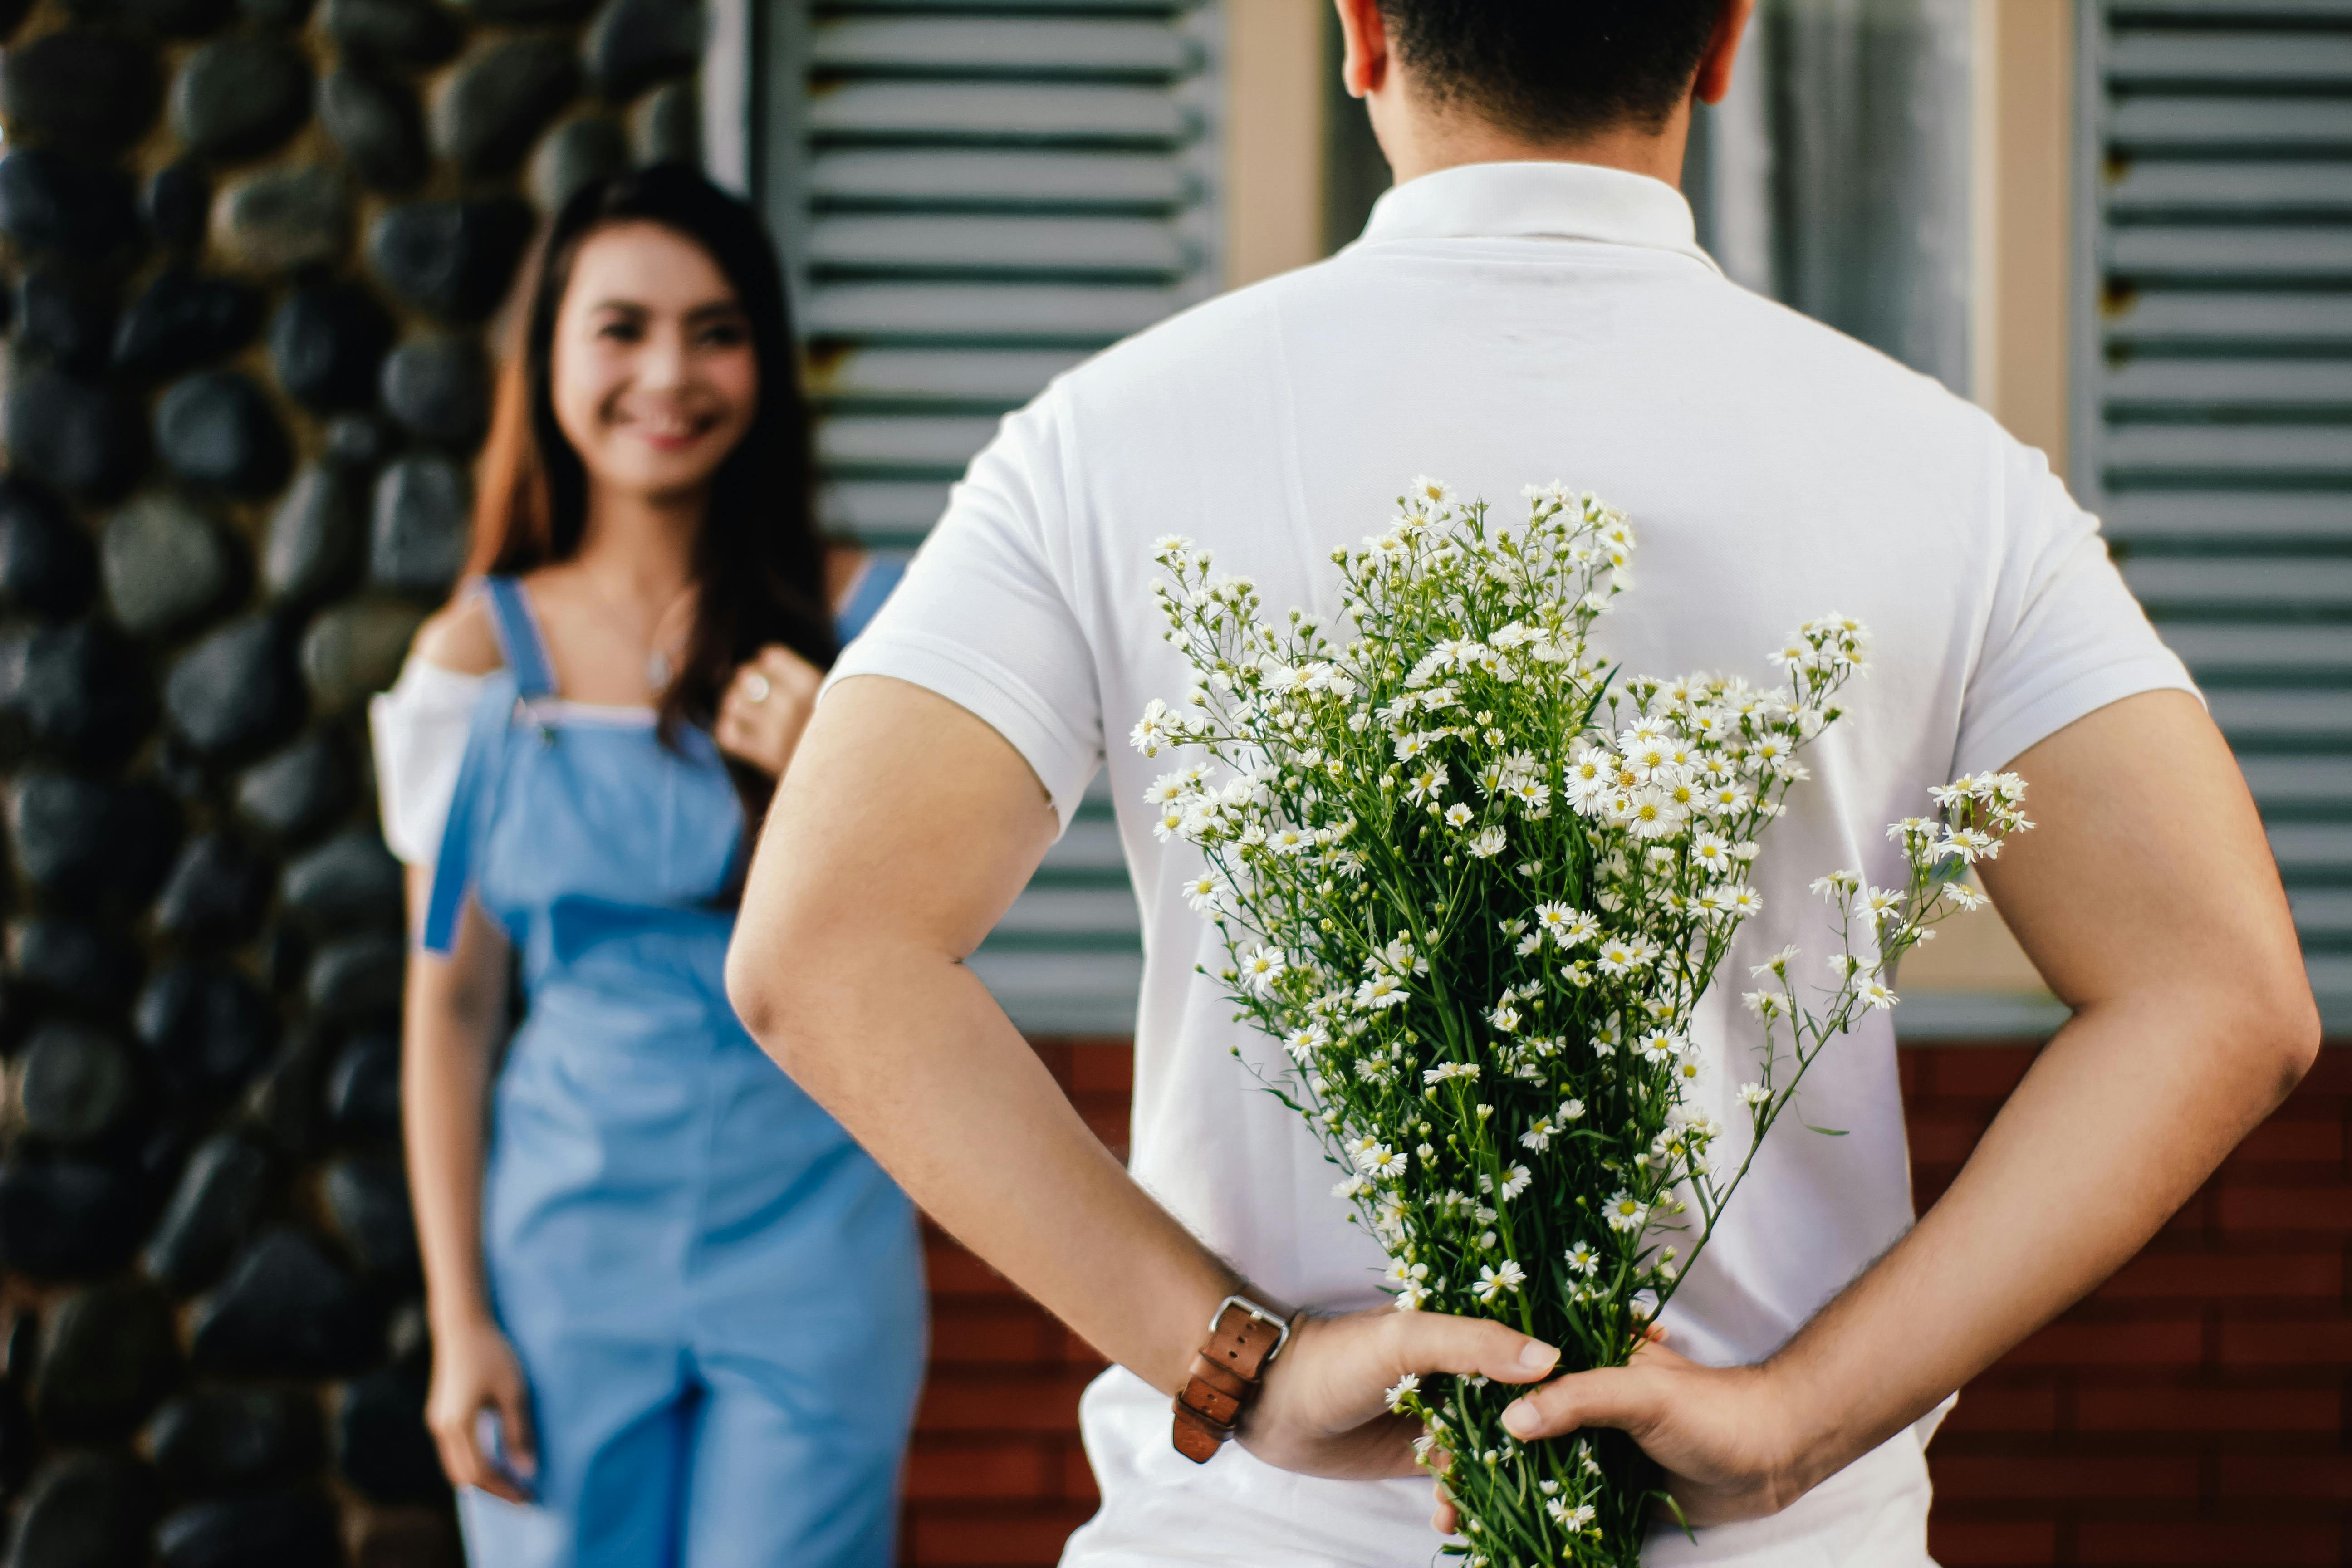 A man surprising a woman with flowers | Source: Pexels